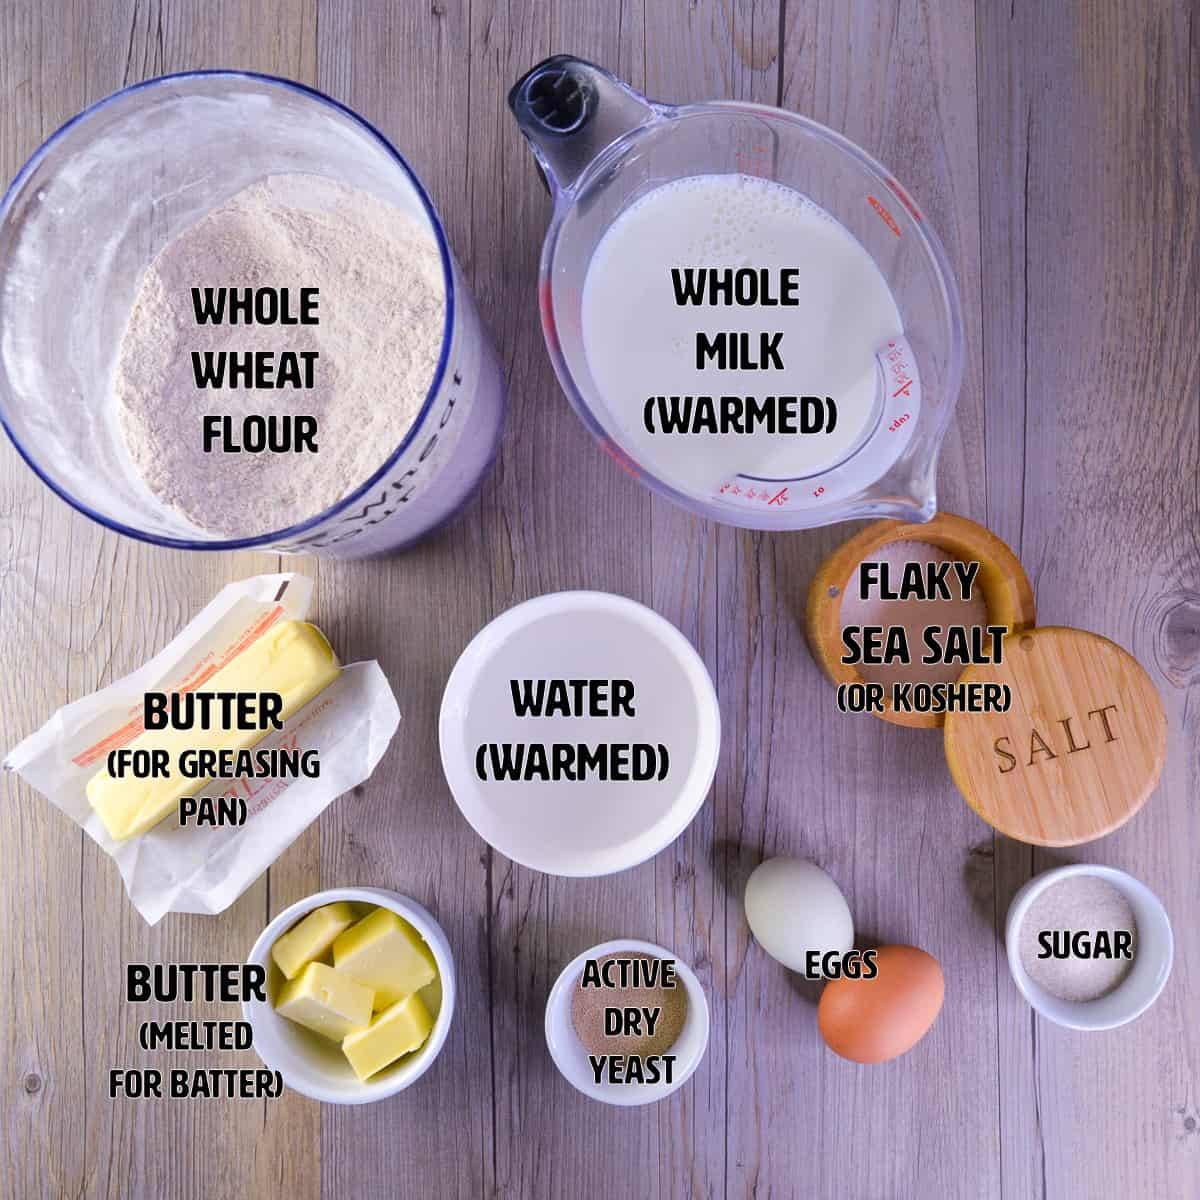 Ingredients shown on counter for Yeasted Blini with labels